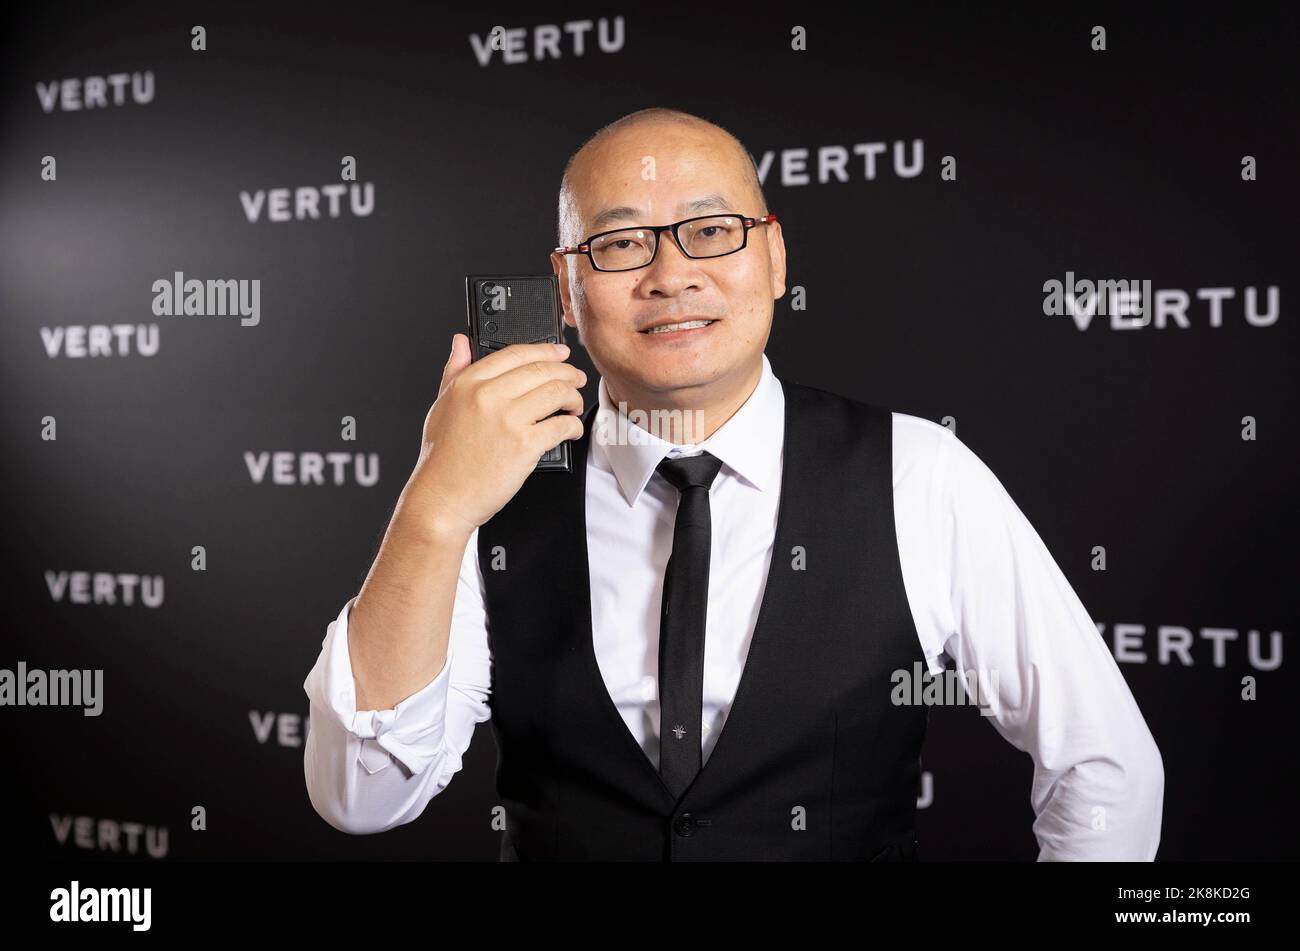 EDITORIAL USE ONLY Global CEO of Vertu Gary Chan at a press conference to announce the UK launch of the 'METAVERTU', the world's first Web3.0 enabled smartphone by luxury mobile phone manufacturer, VERTU. Picture date: Monday October 24, 2022. Stock Photo